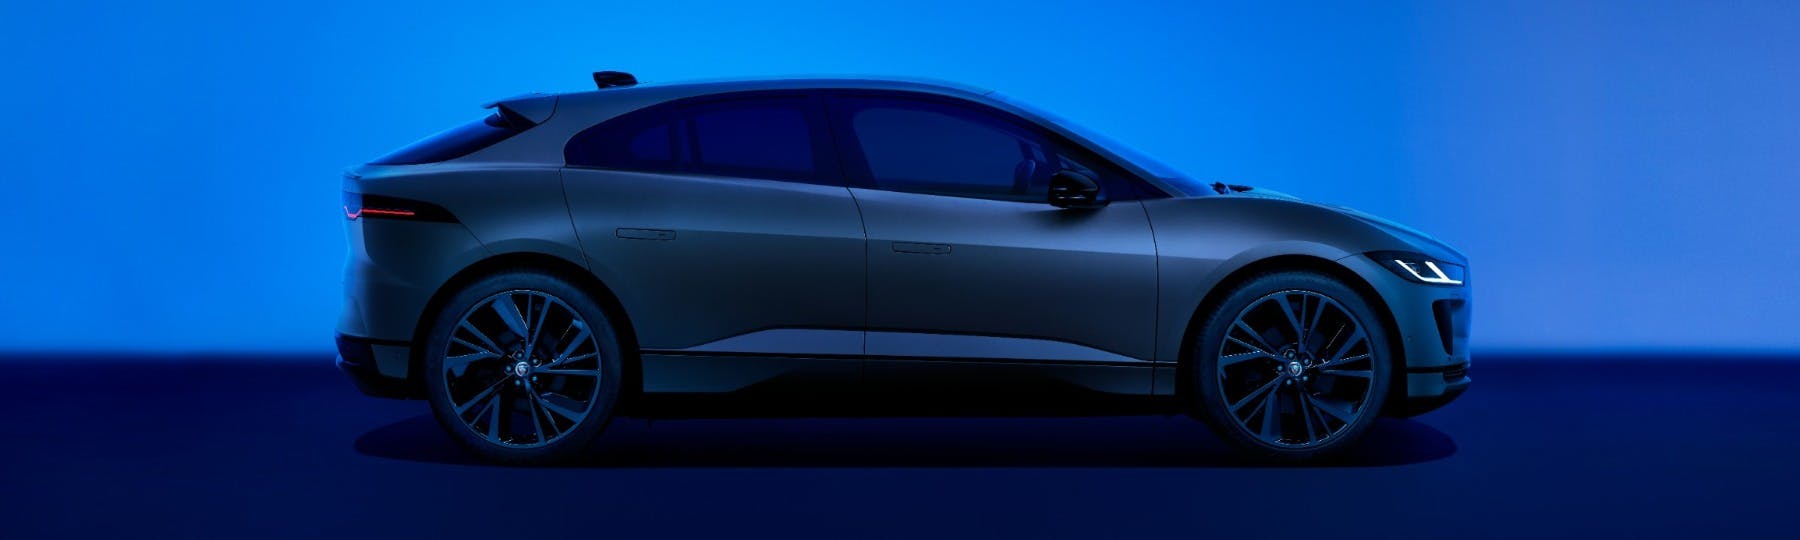 jaguar I PACE Personal Contract Hire Offer